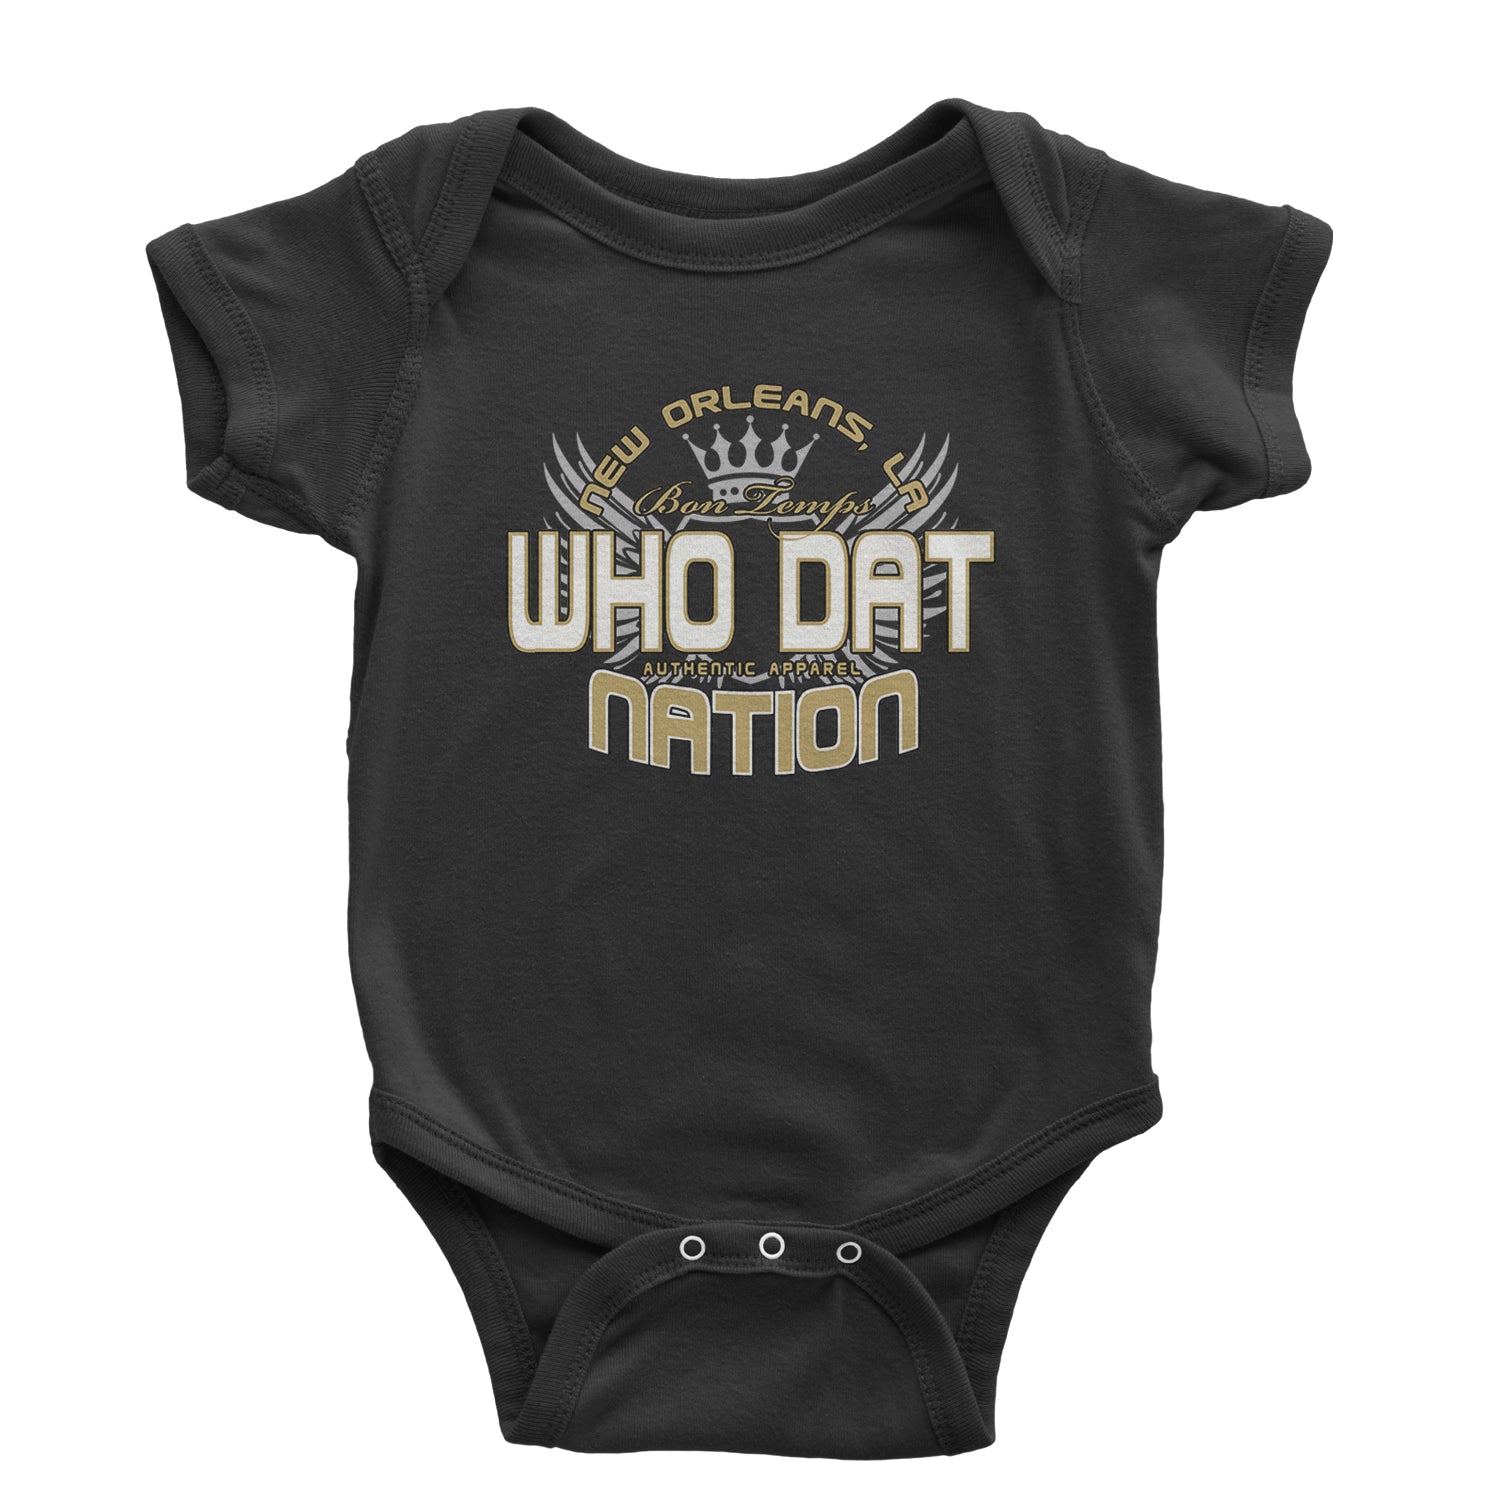 Who Dat Nation New Orleans (Color) Infant One-Piece Romper Bodysuit and Toddler T-shirt